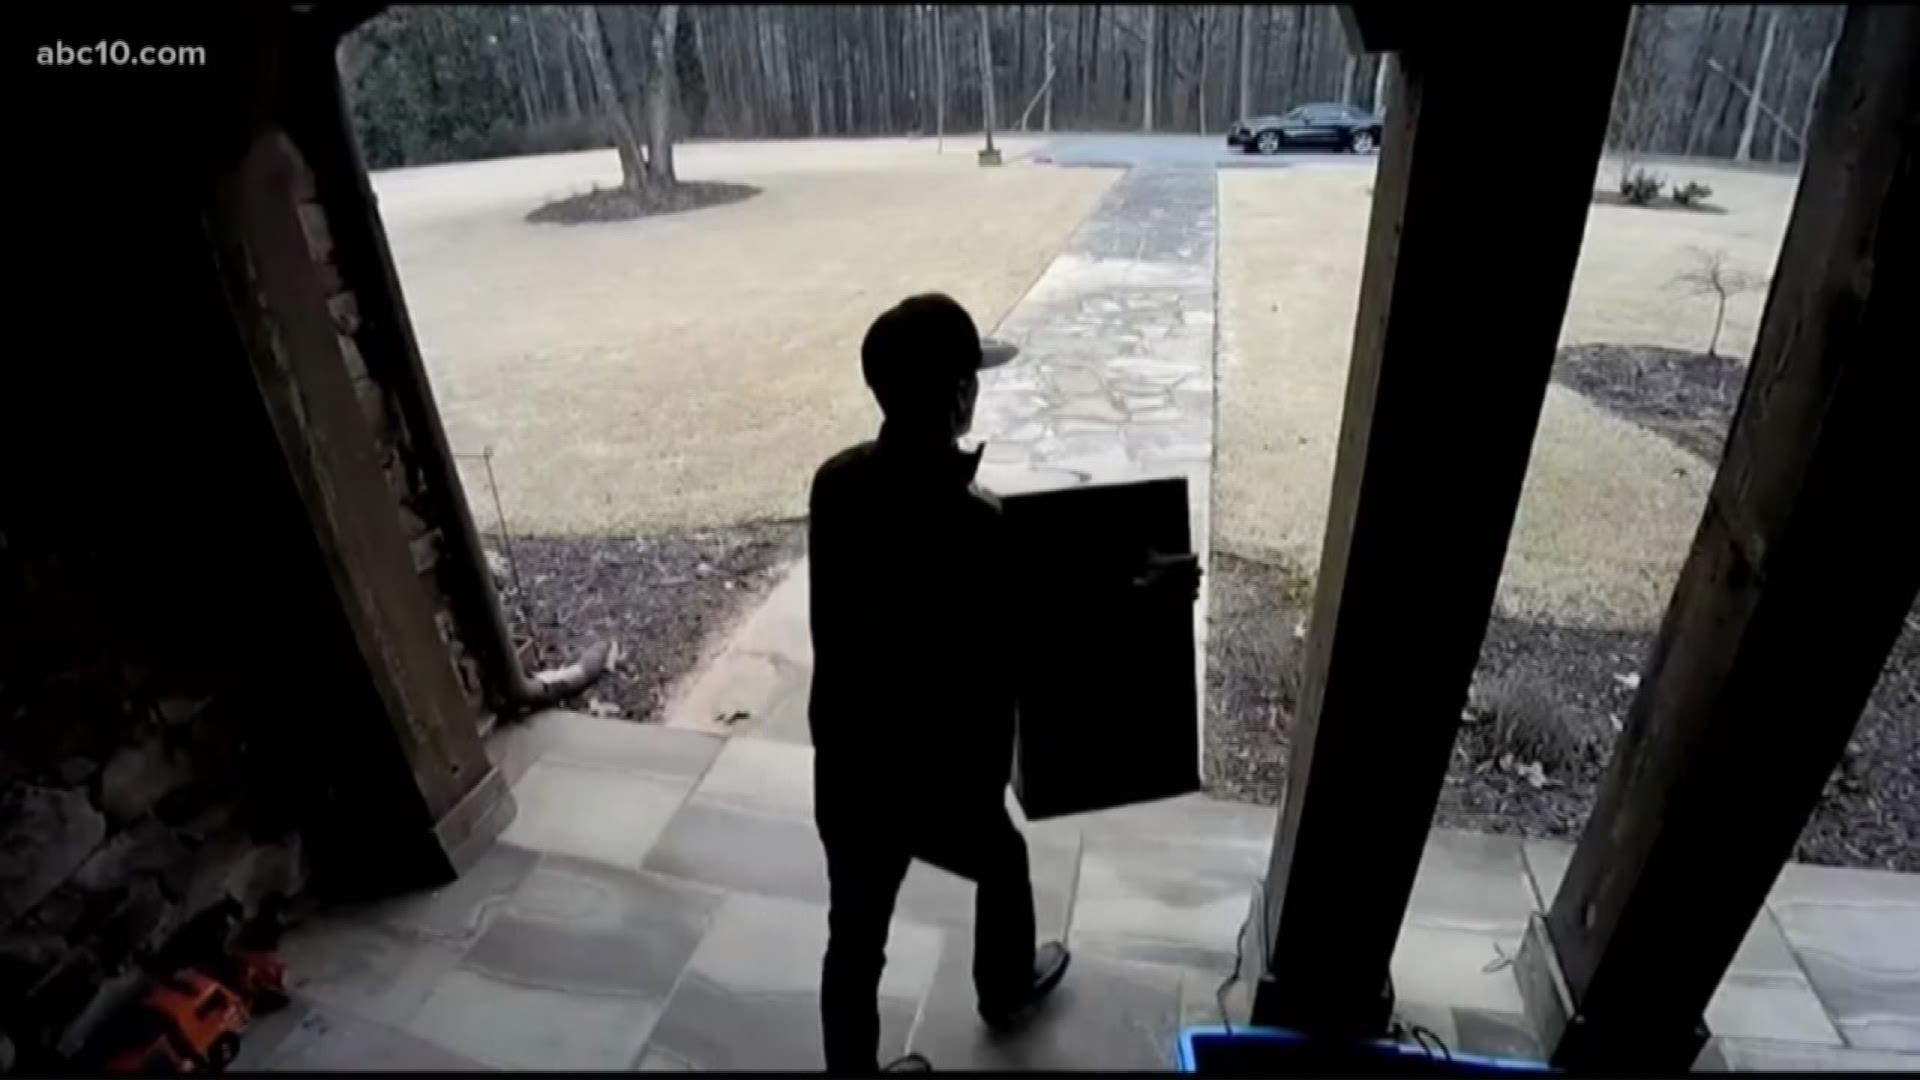 With the rising number of home deliveries, law enforcement agencies across the country have reported an increase in the reports of package thefts, especially during the holiday season. And some victims are even striking back, making do-it-yourself bait packages to deter or get revenge on thieves. But what are the risks? A spokesperson with the Sacramento County Sheriff’s Department explained.